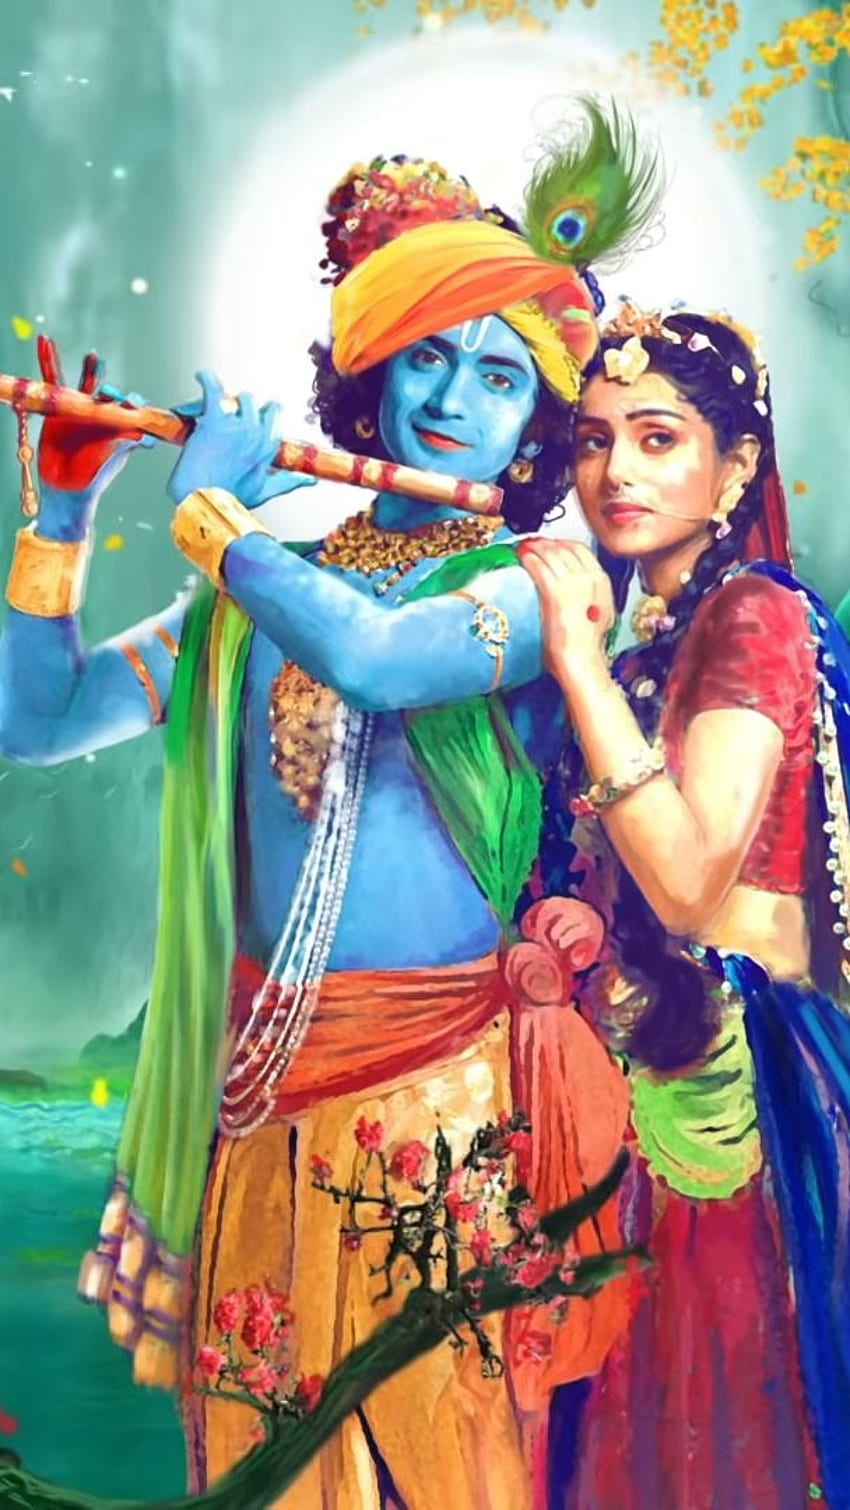 Incredible Collection of Radha Krishna Images Serials – Over 999+ Stunning Images in Full 4K